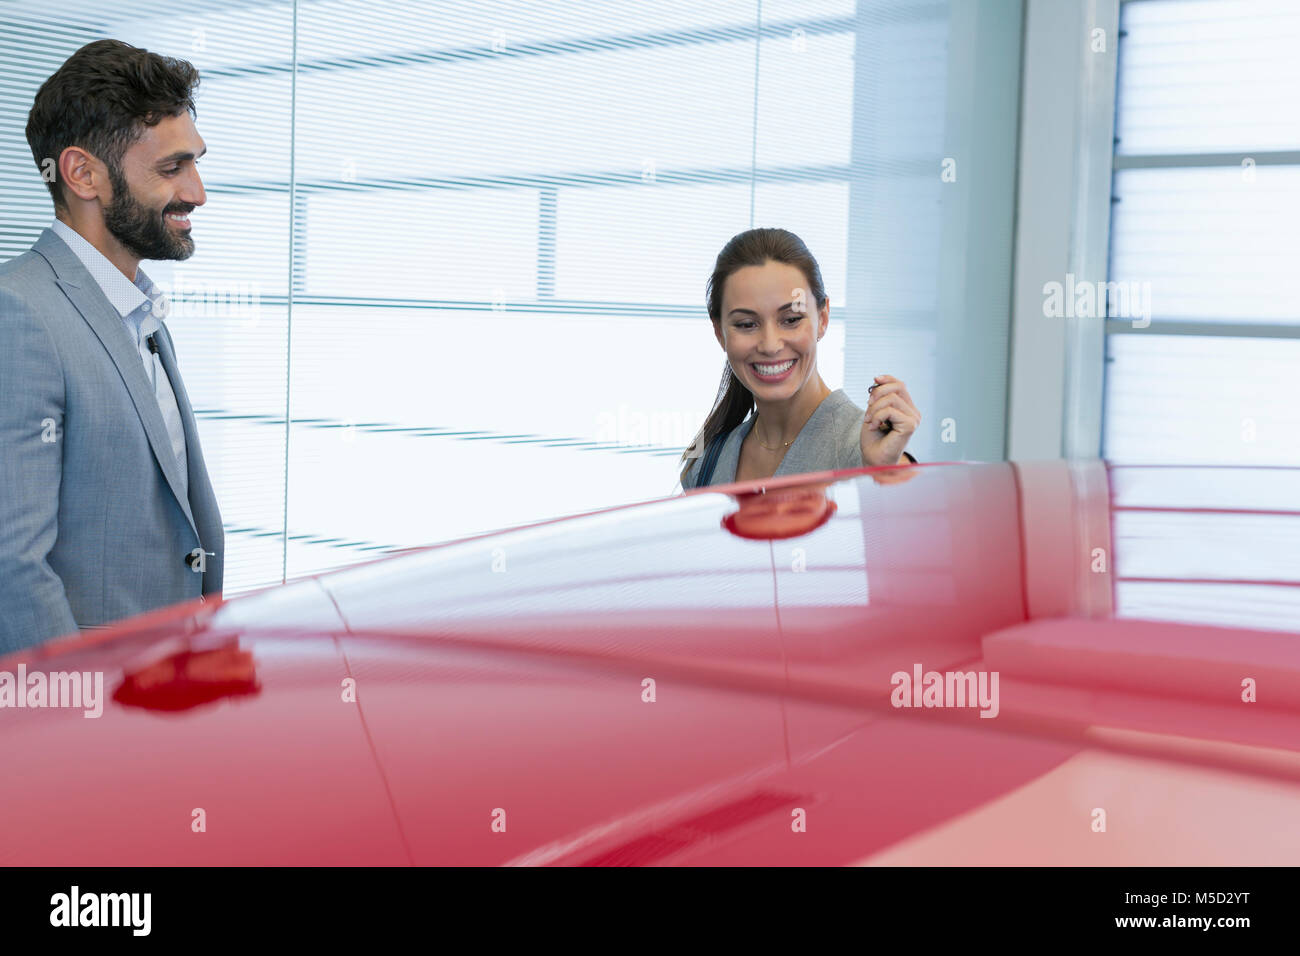 Smiling car salesman showing new red car to female customer in car dealership showroom Stock Photo